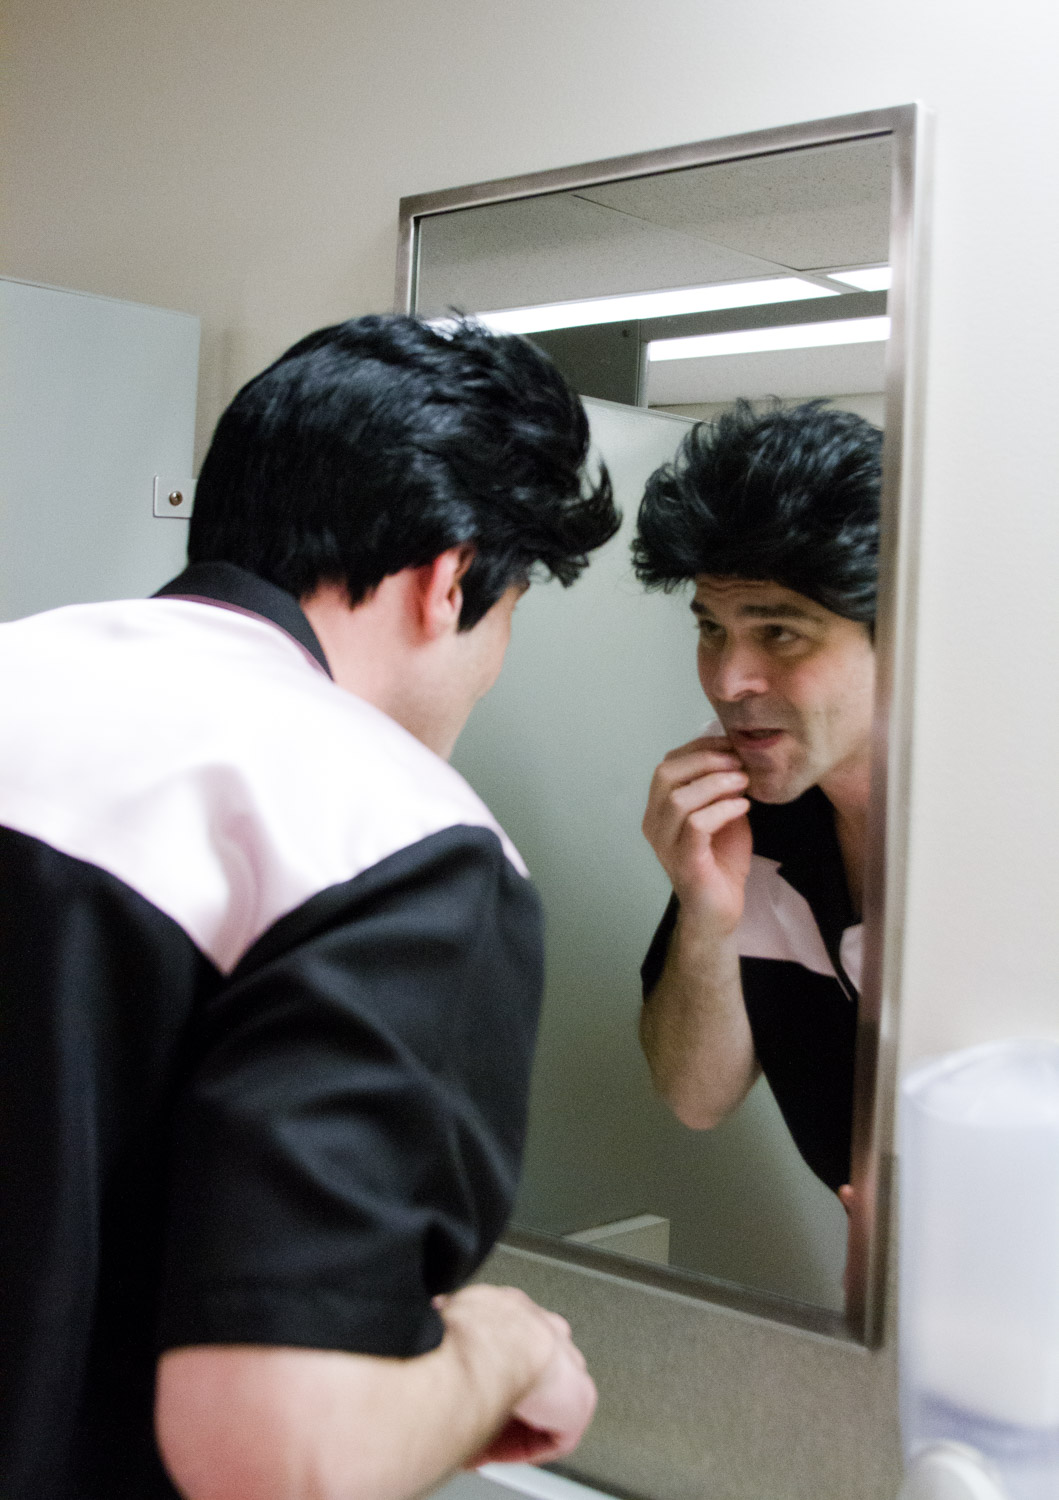 A Elvis tribute artist puts on makeup in a mirror.